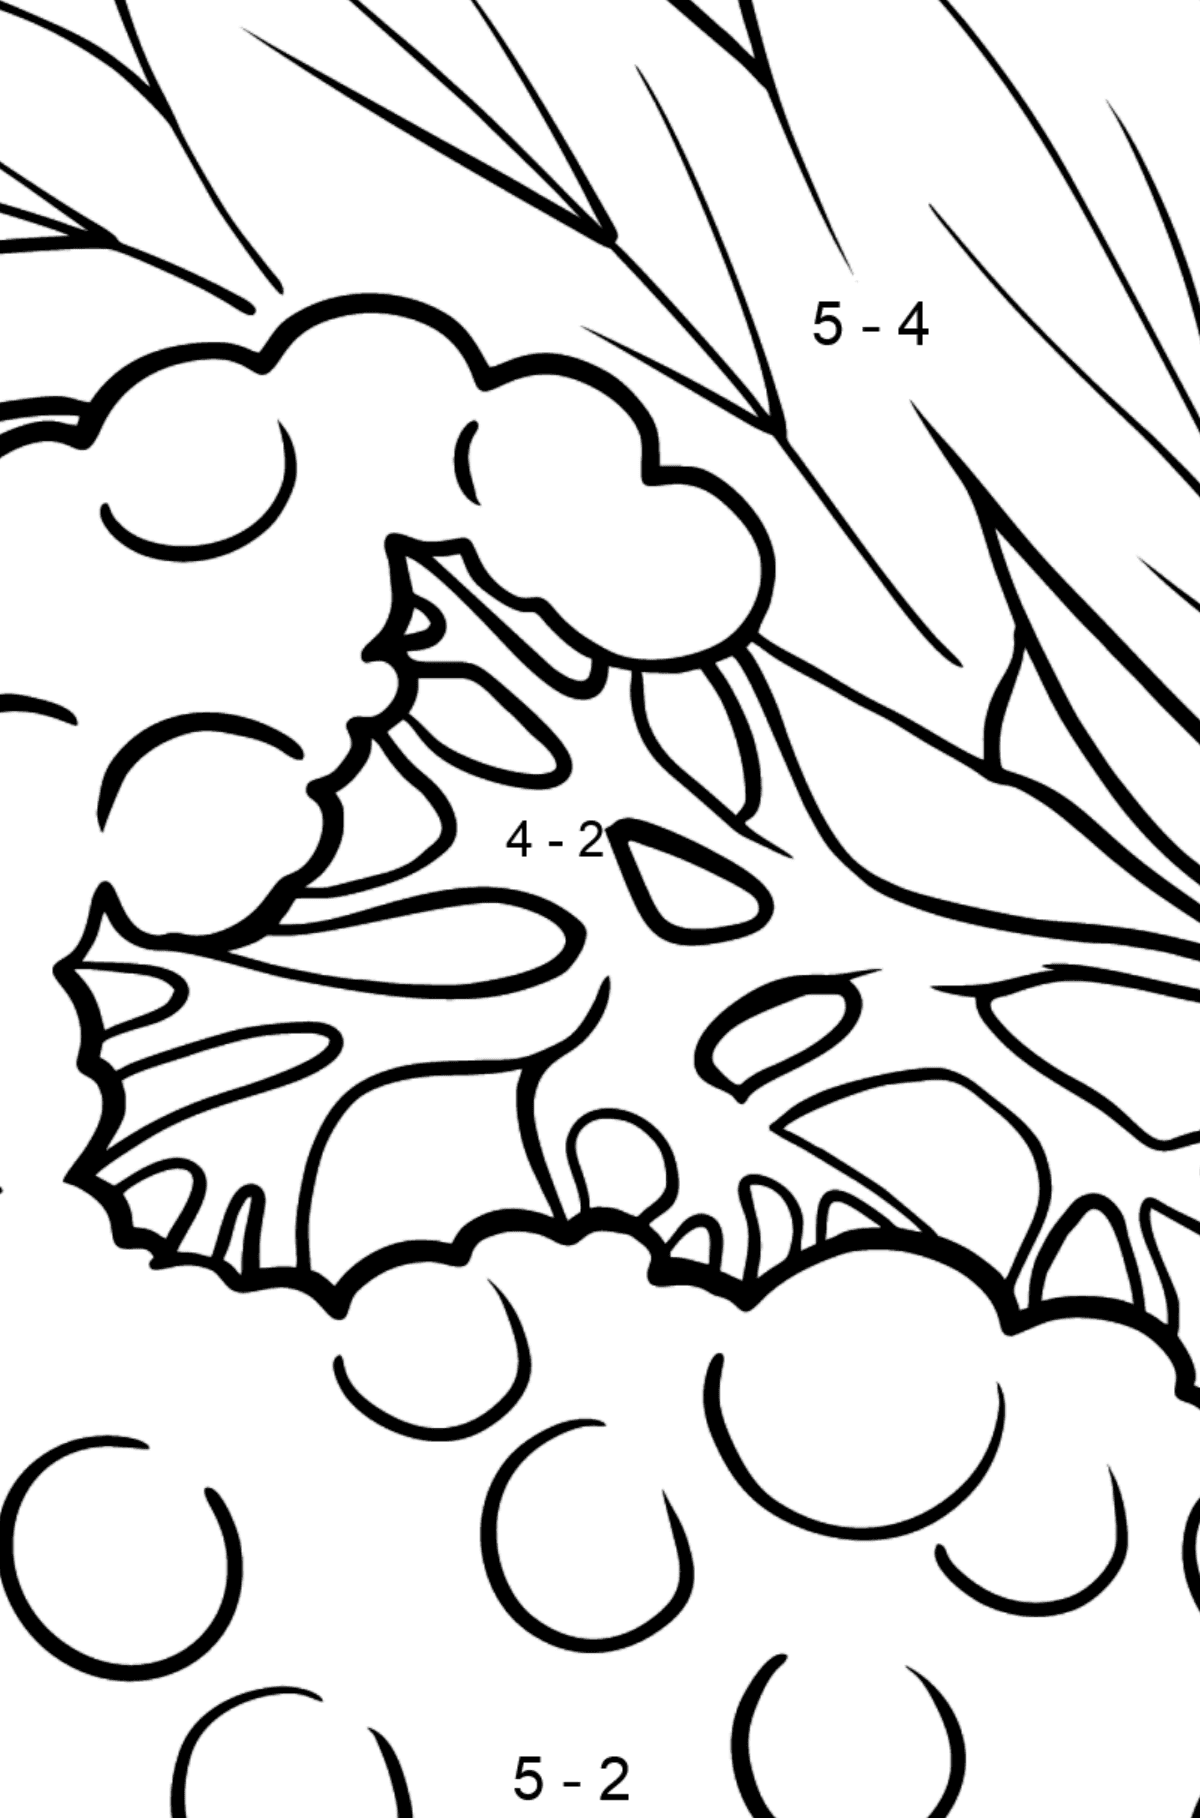 Elderberry coloring page - Math Coloring - Subtraction for Kids